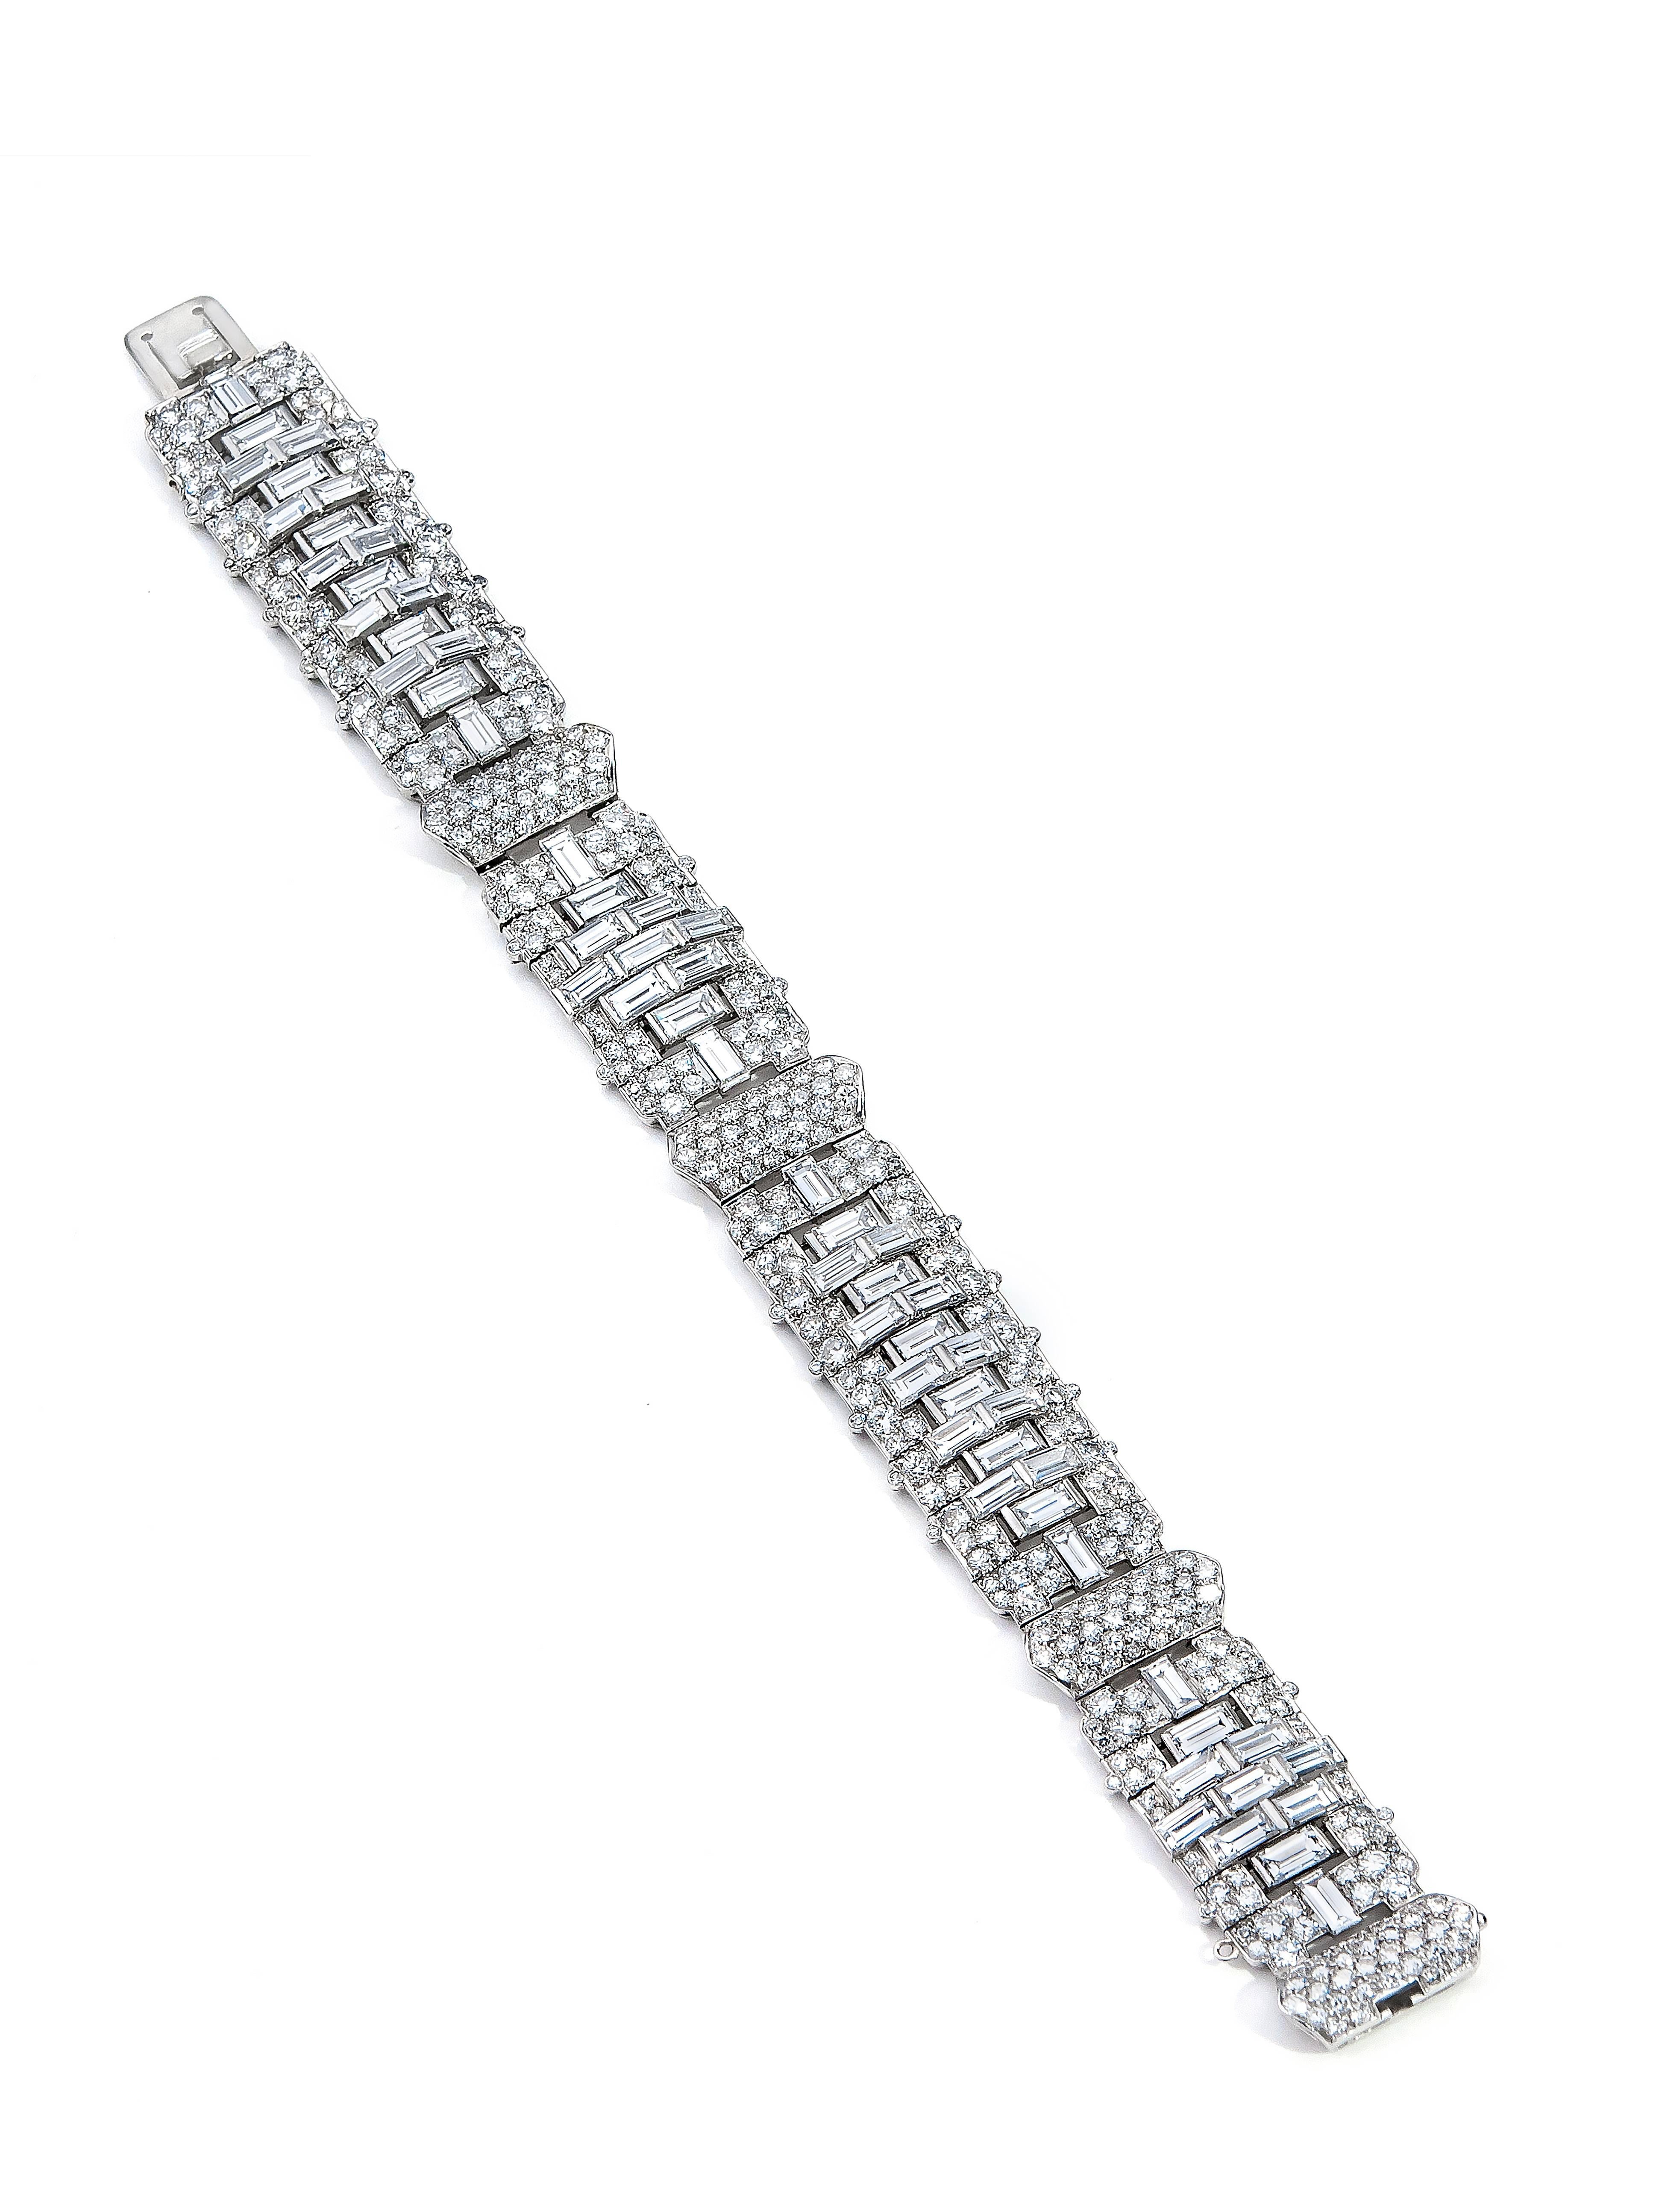 This bracelet is an original Art Deco piece with amazing quality and craftsmanship. In our opinion, it is one of the best examples of its kind that we have seen. The total weight of the diamonds is approximately 24.5 carats. This includes 58